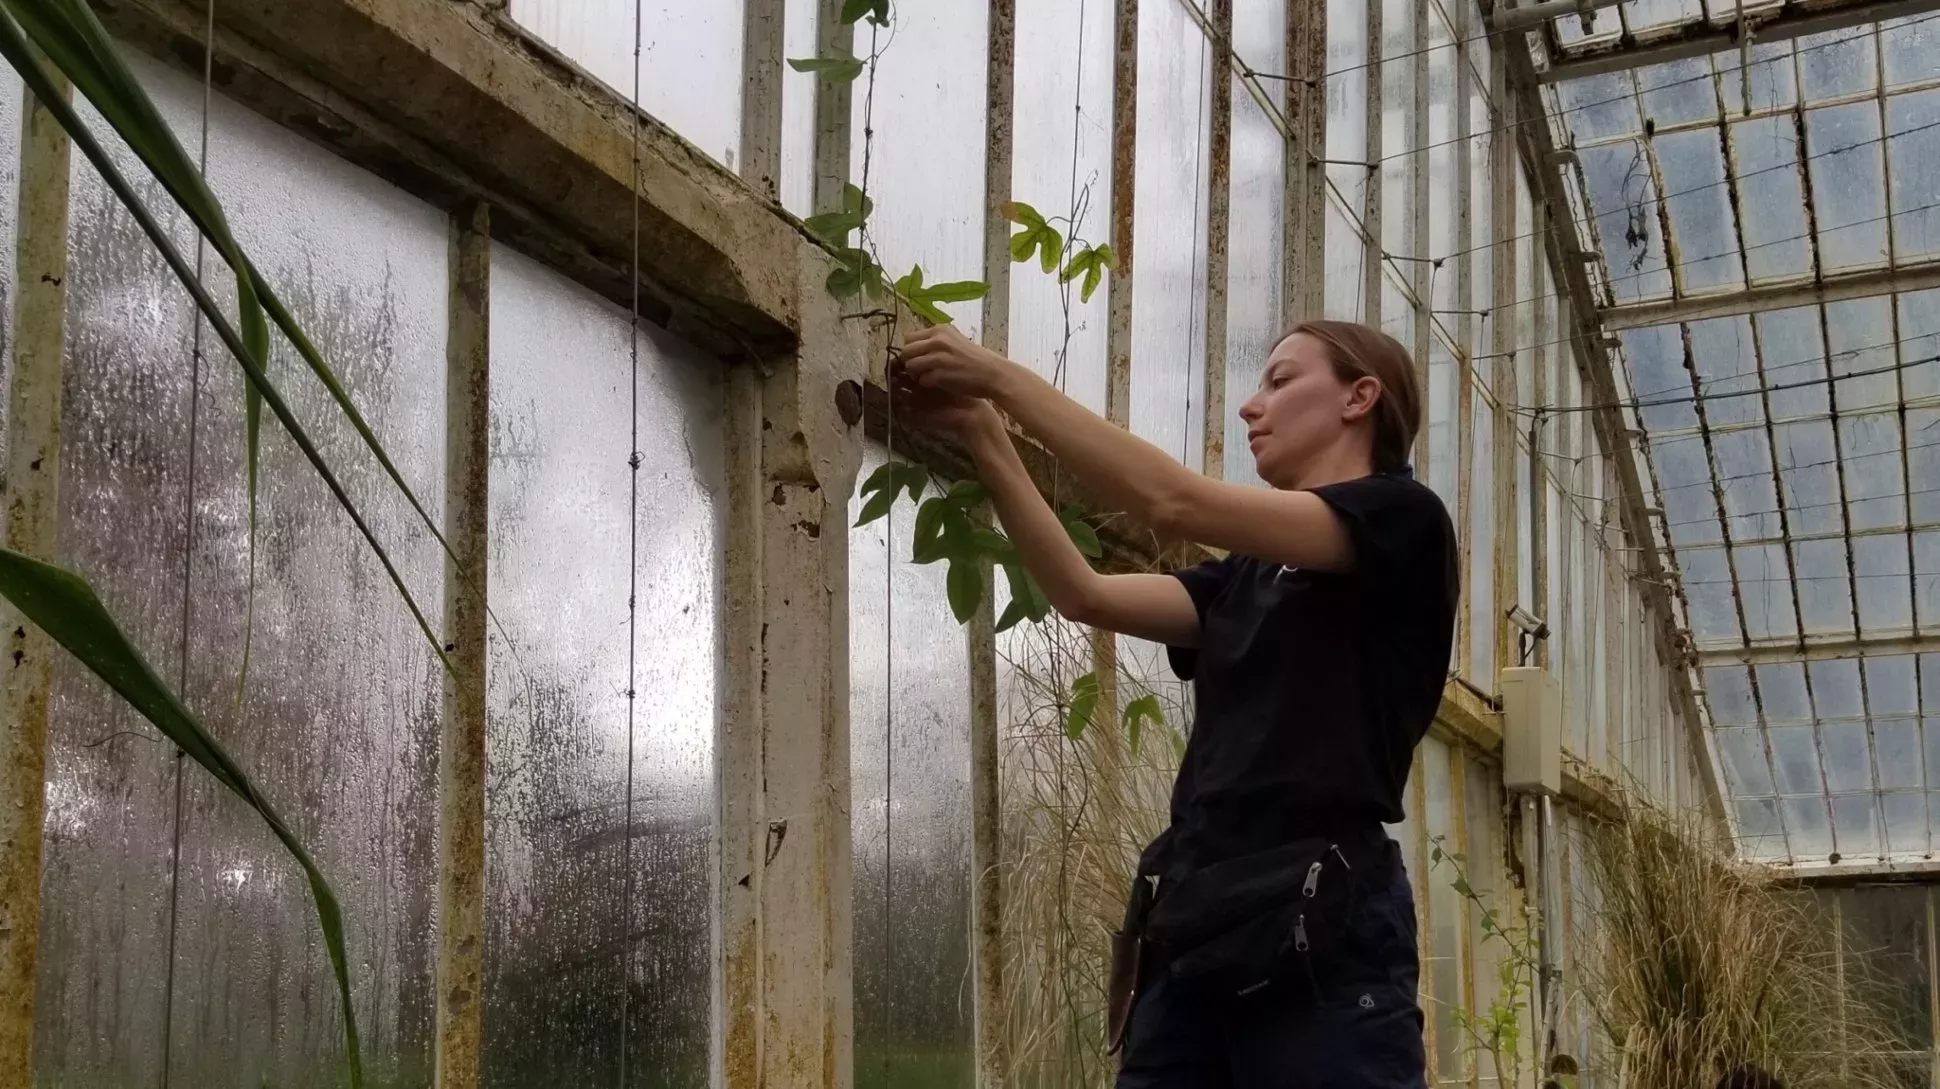 A person tying a plant to the wall of a glasshouse